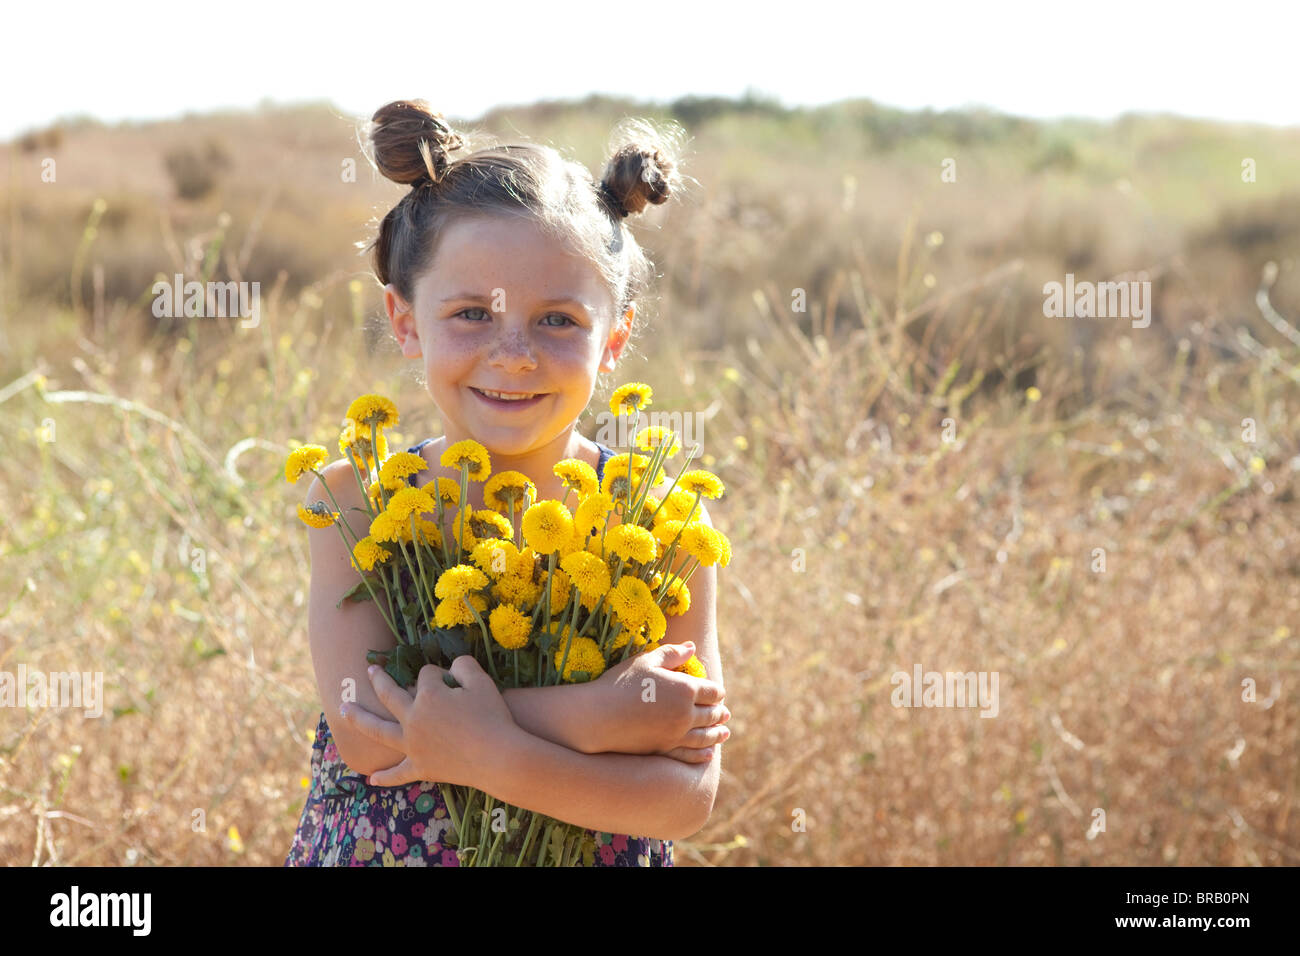 Young girl with an armful of yellow flowers Stock Photo